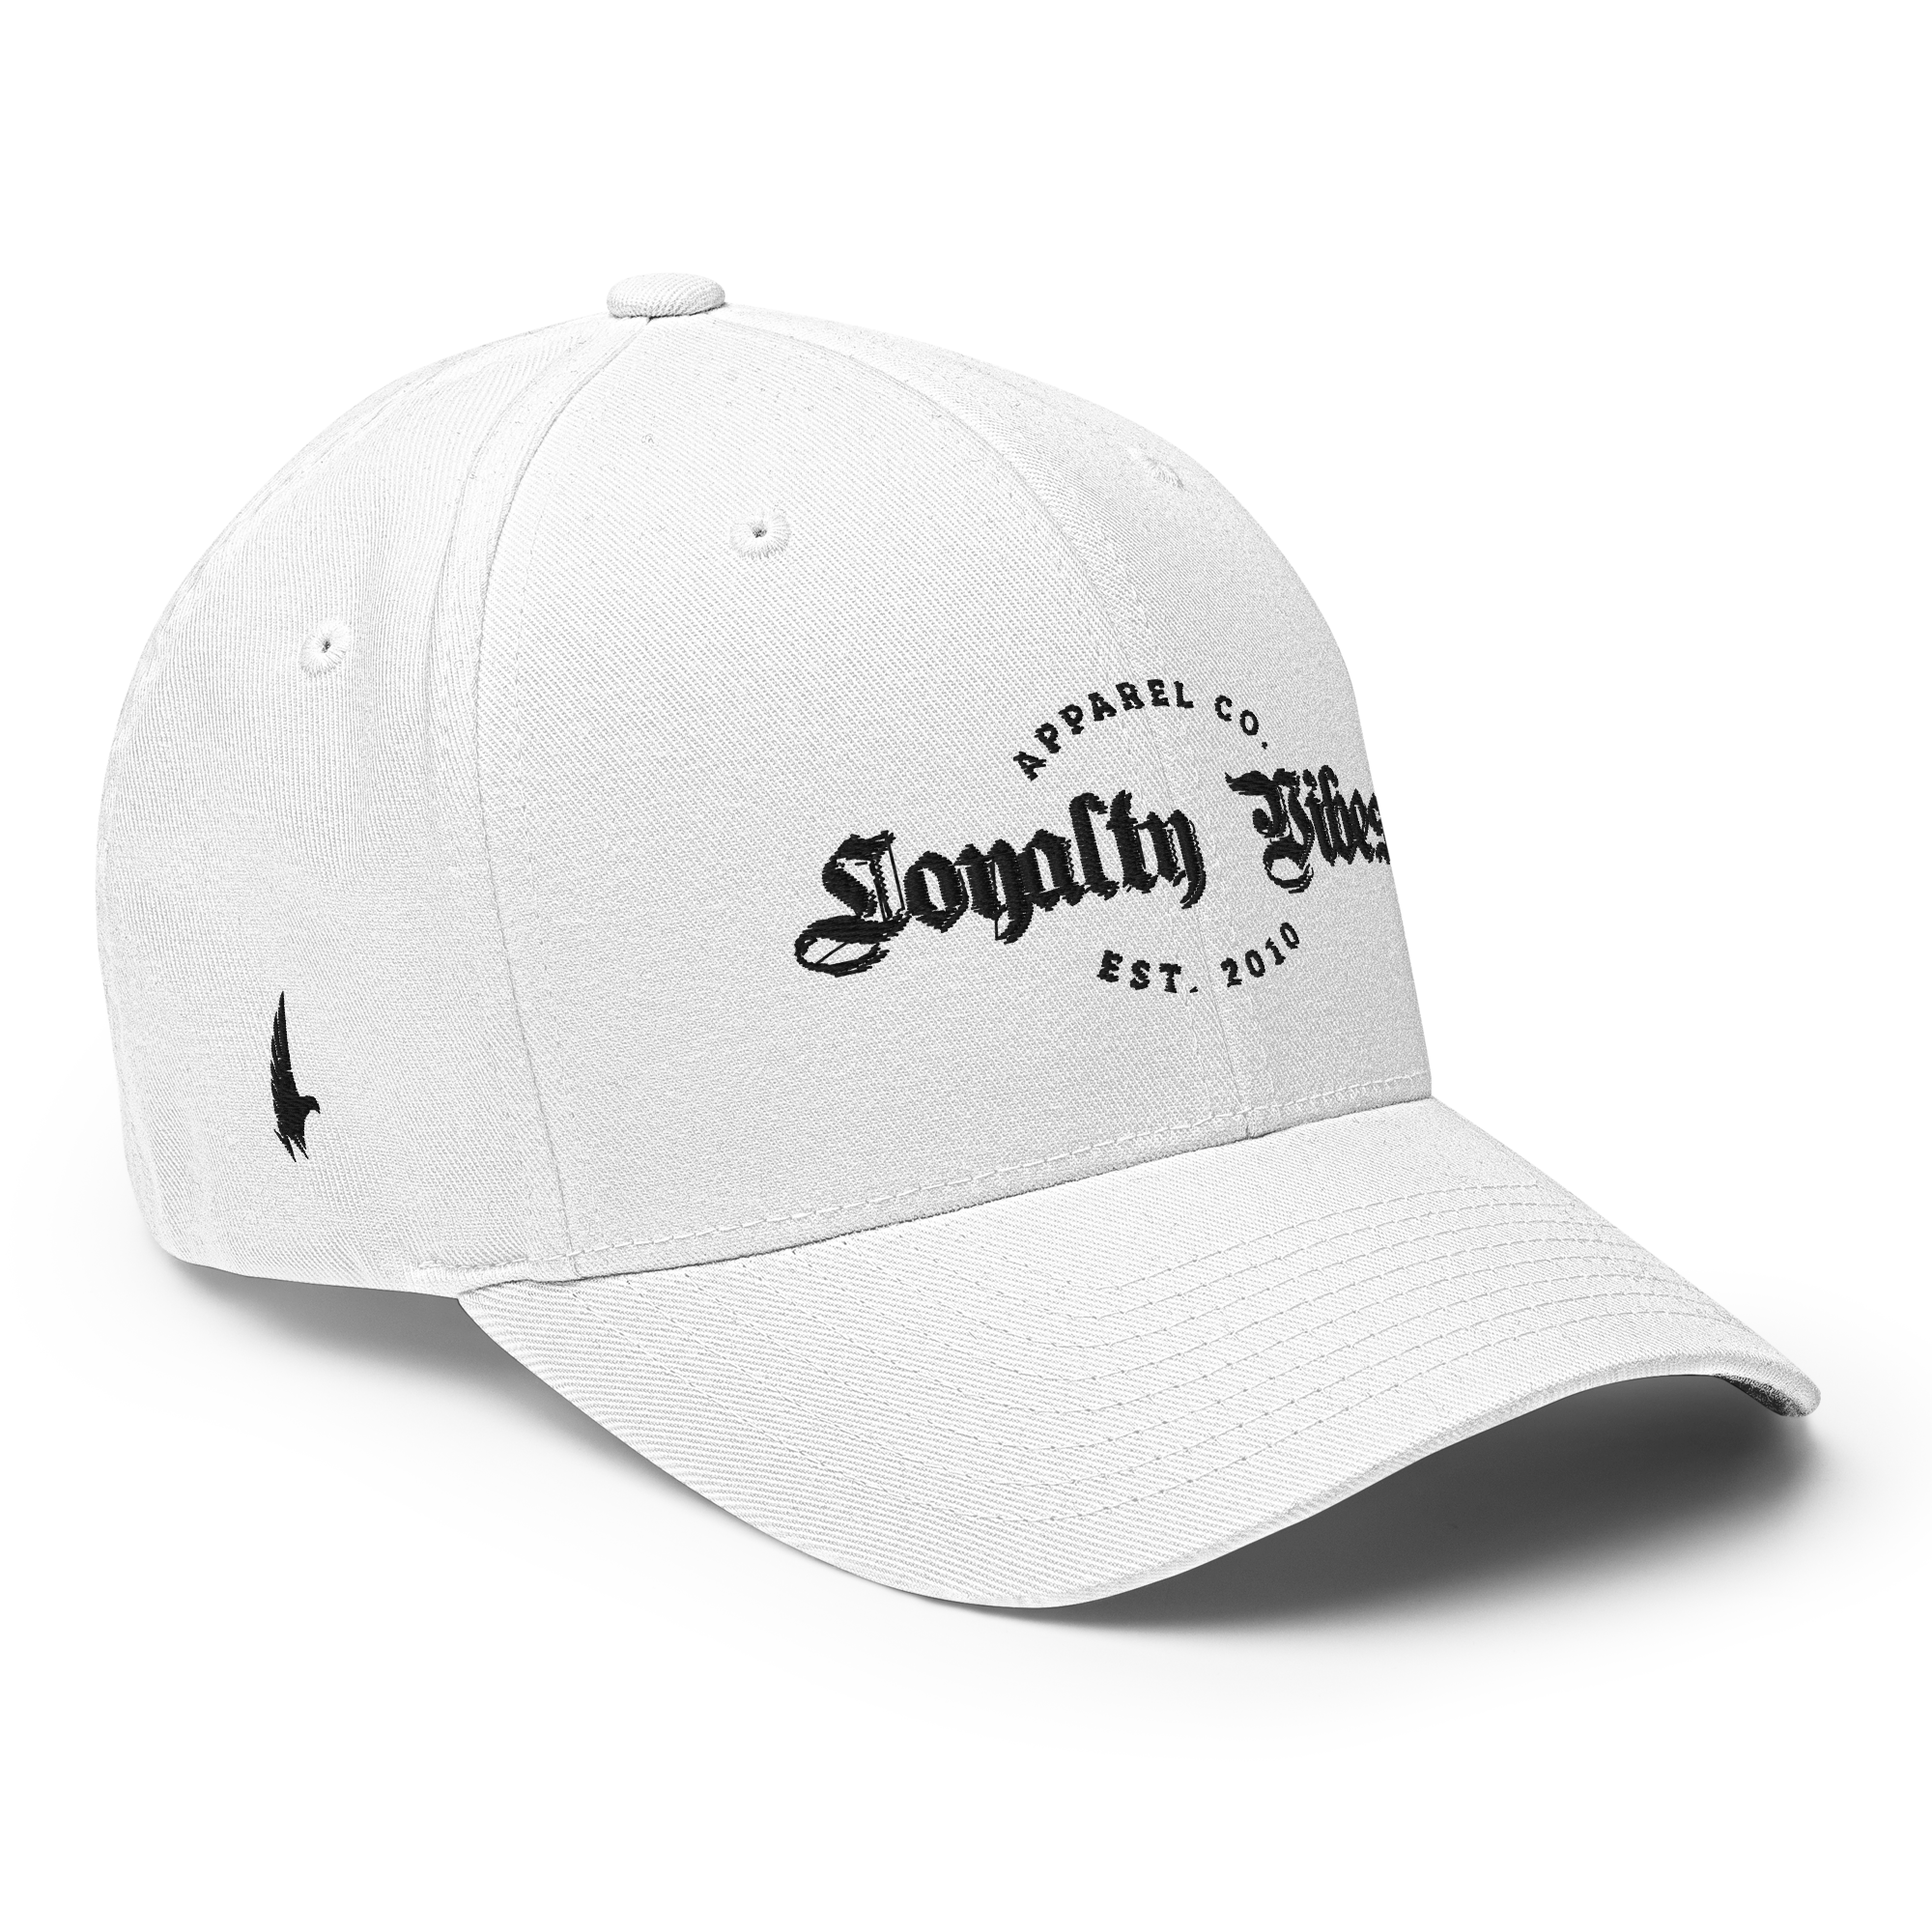 Razor Logo Fitted Hat - White - Loyalty Vibes